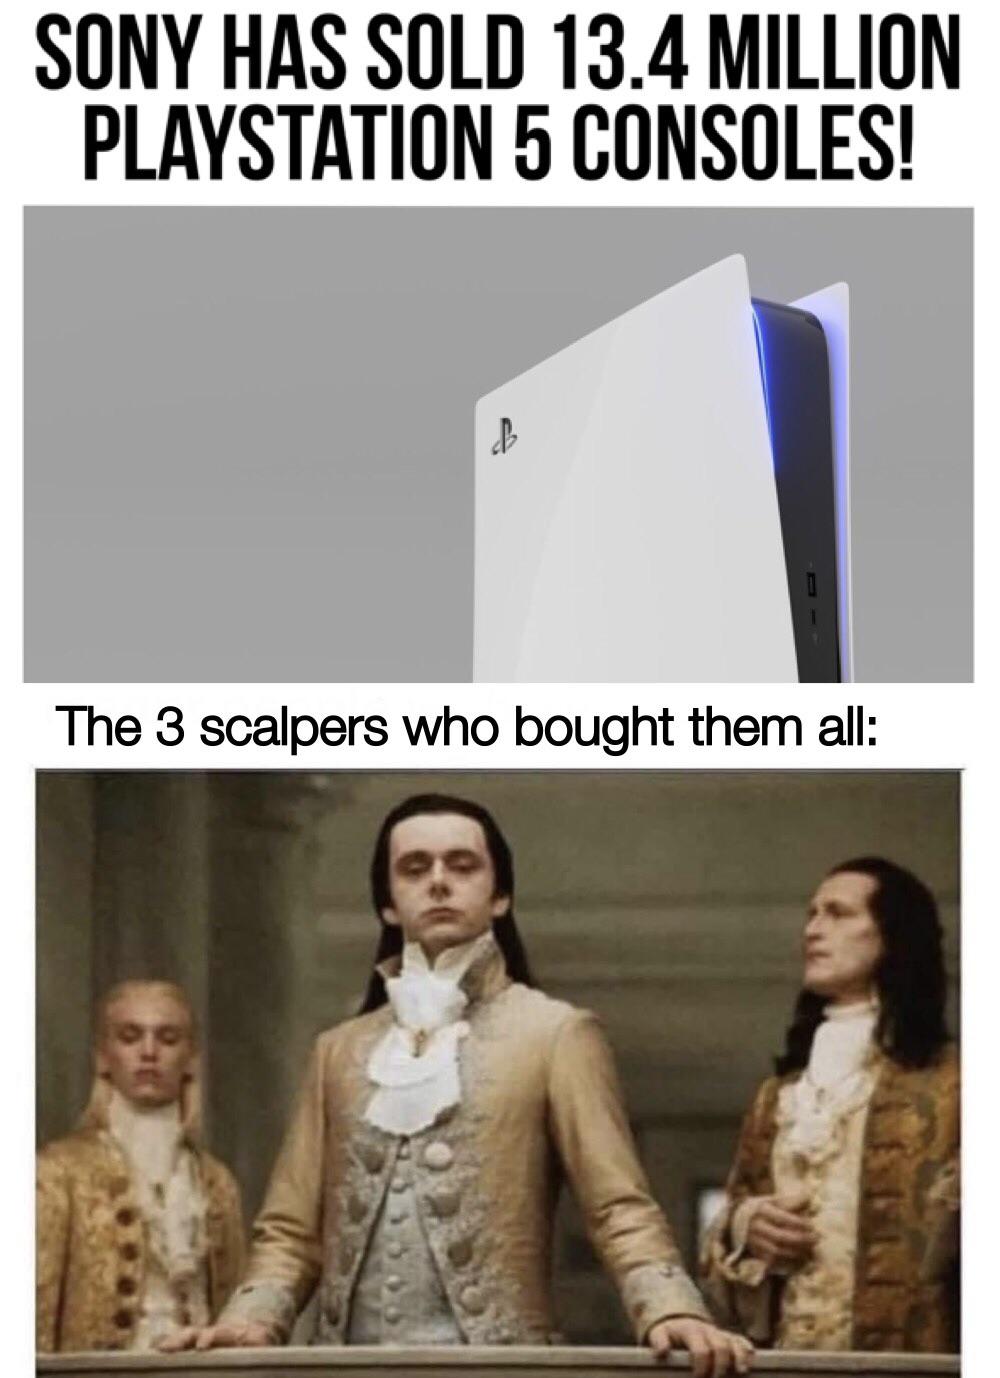 new moon volturi - Sony Has Sold 13.4 Million Playstation 5 Consoles! B The 3 scalpers who bought them all